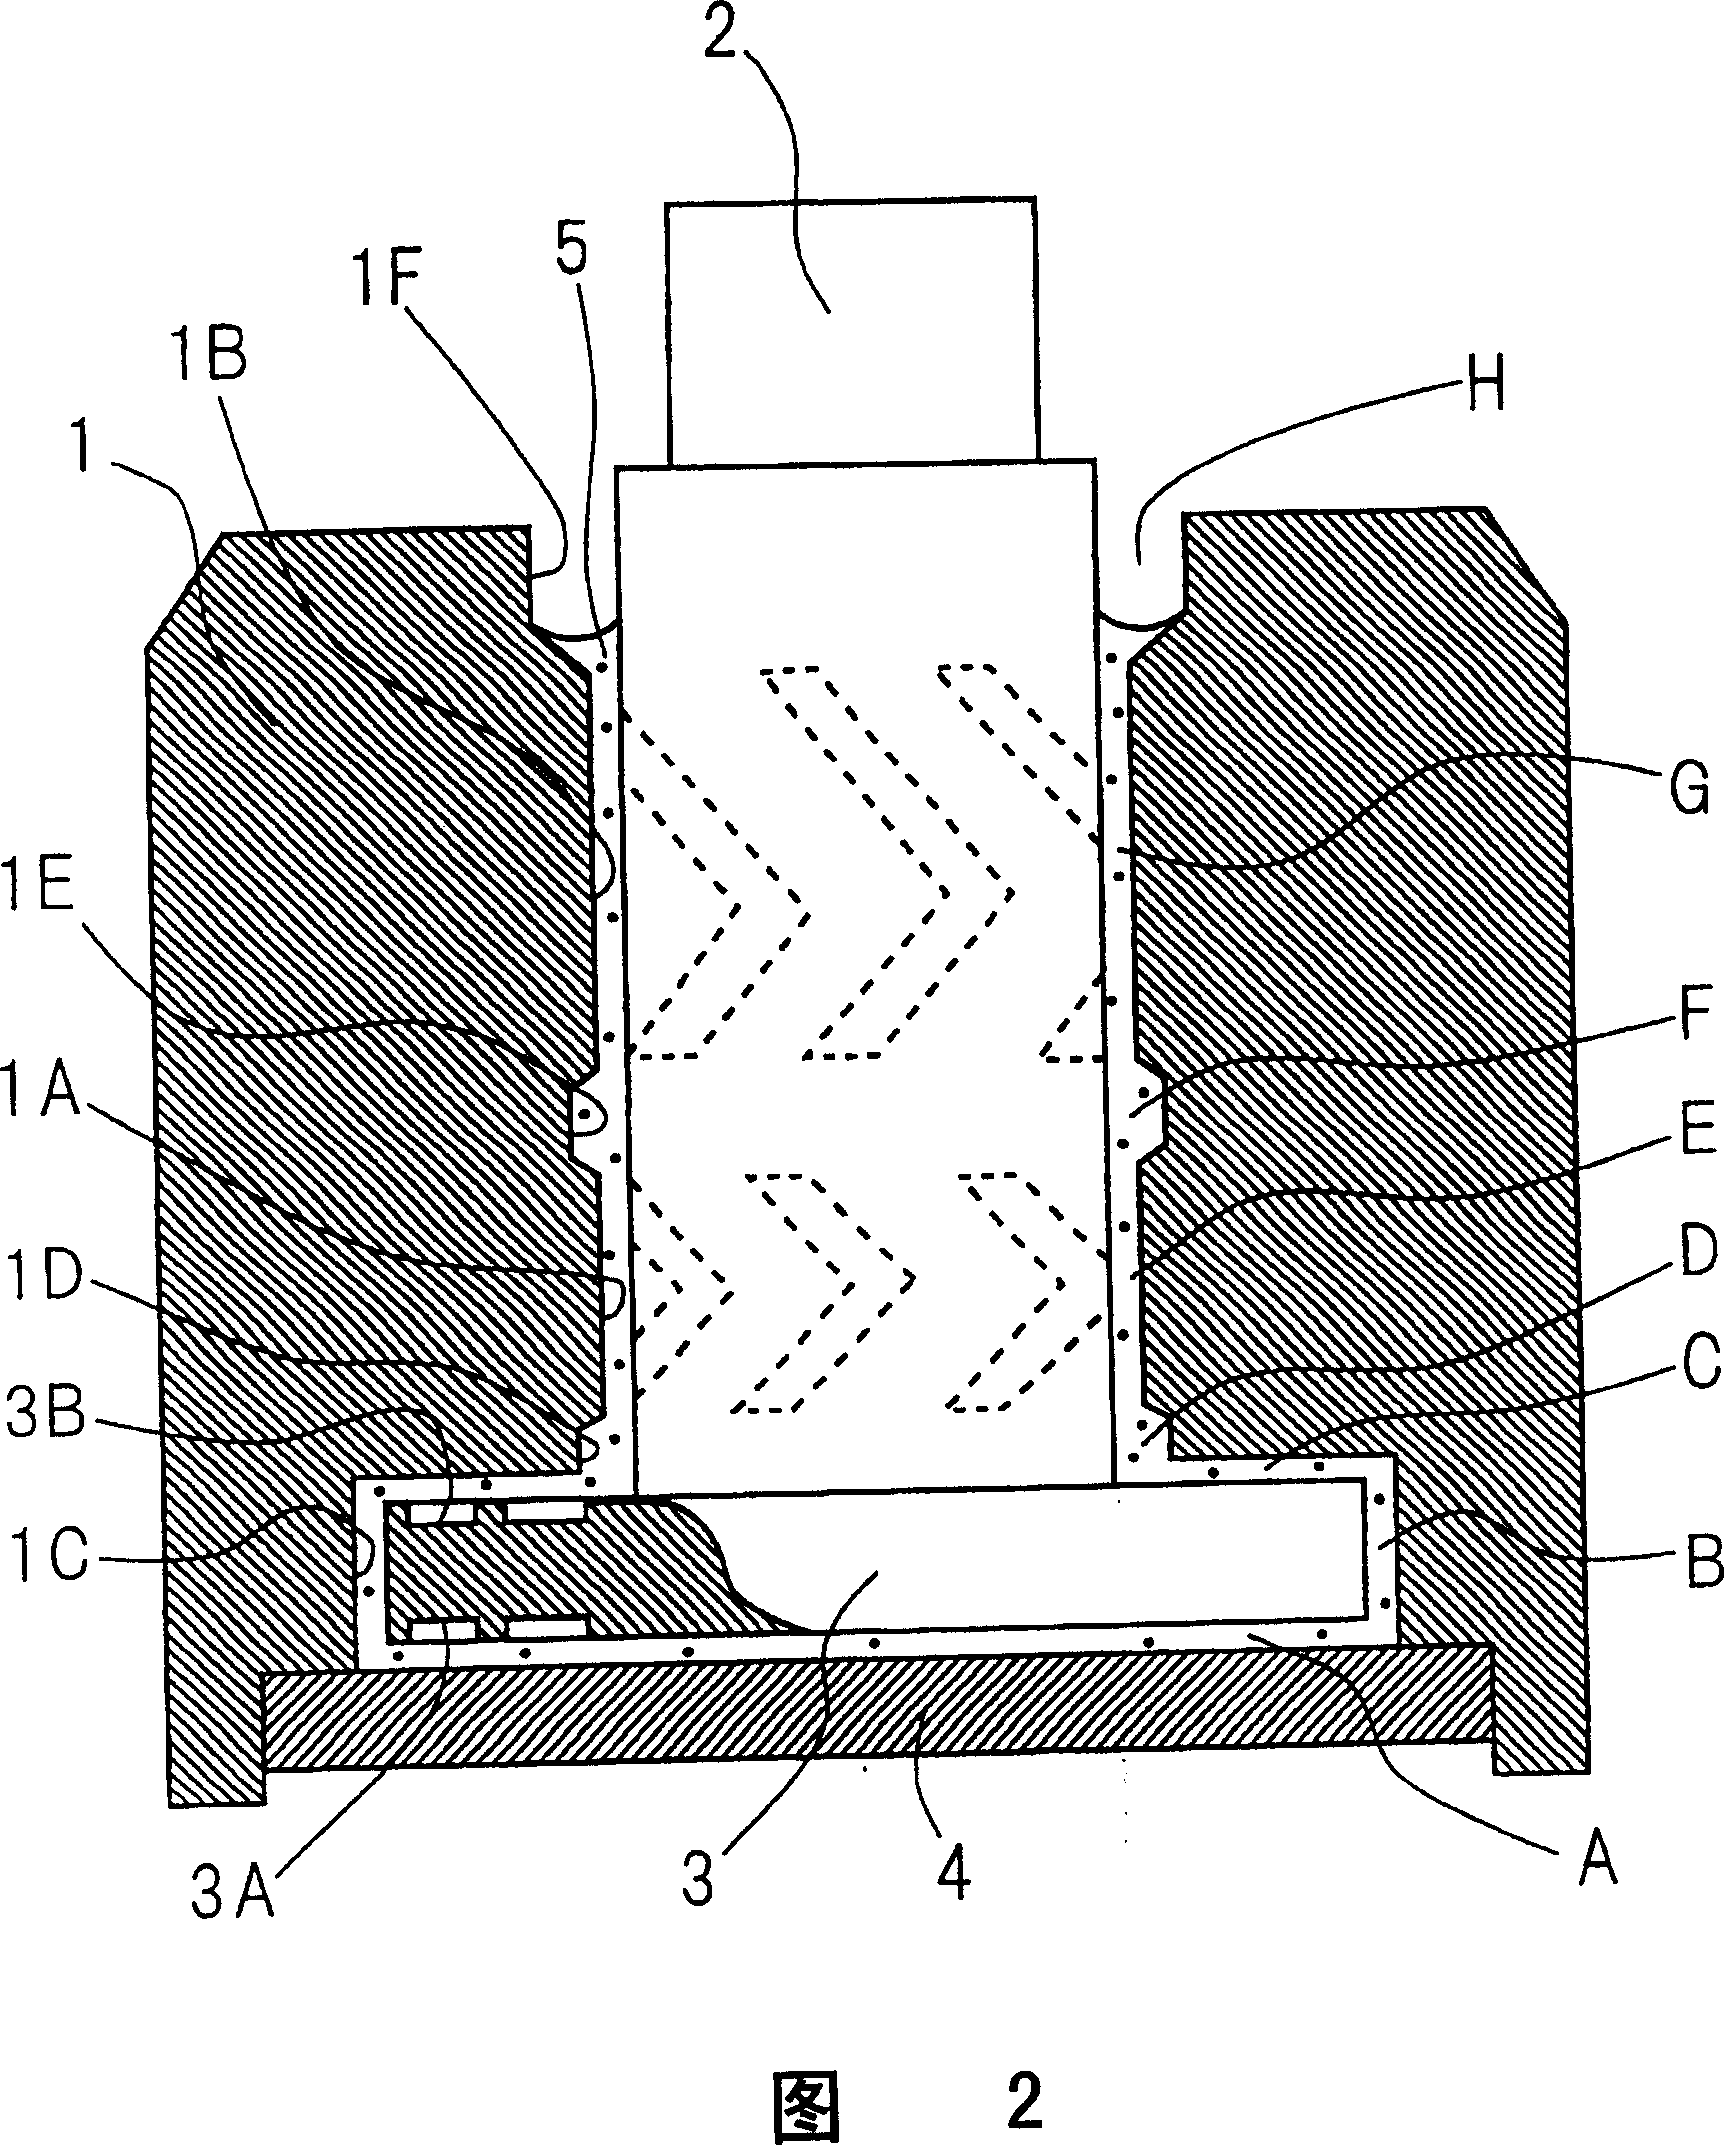 Fluid bearing device and disk recording reproducer